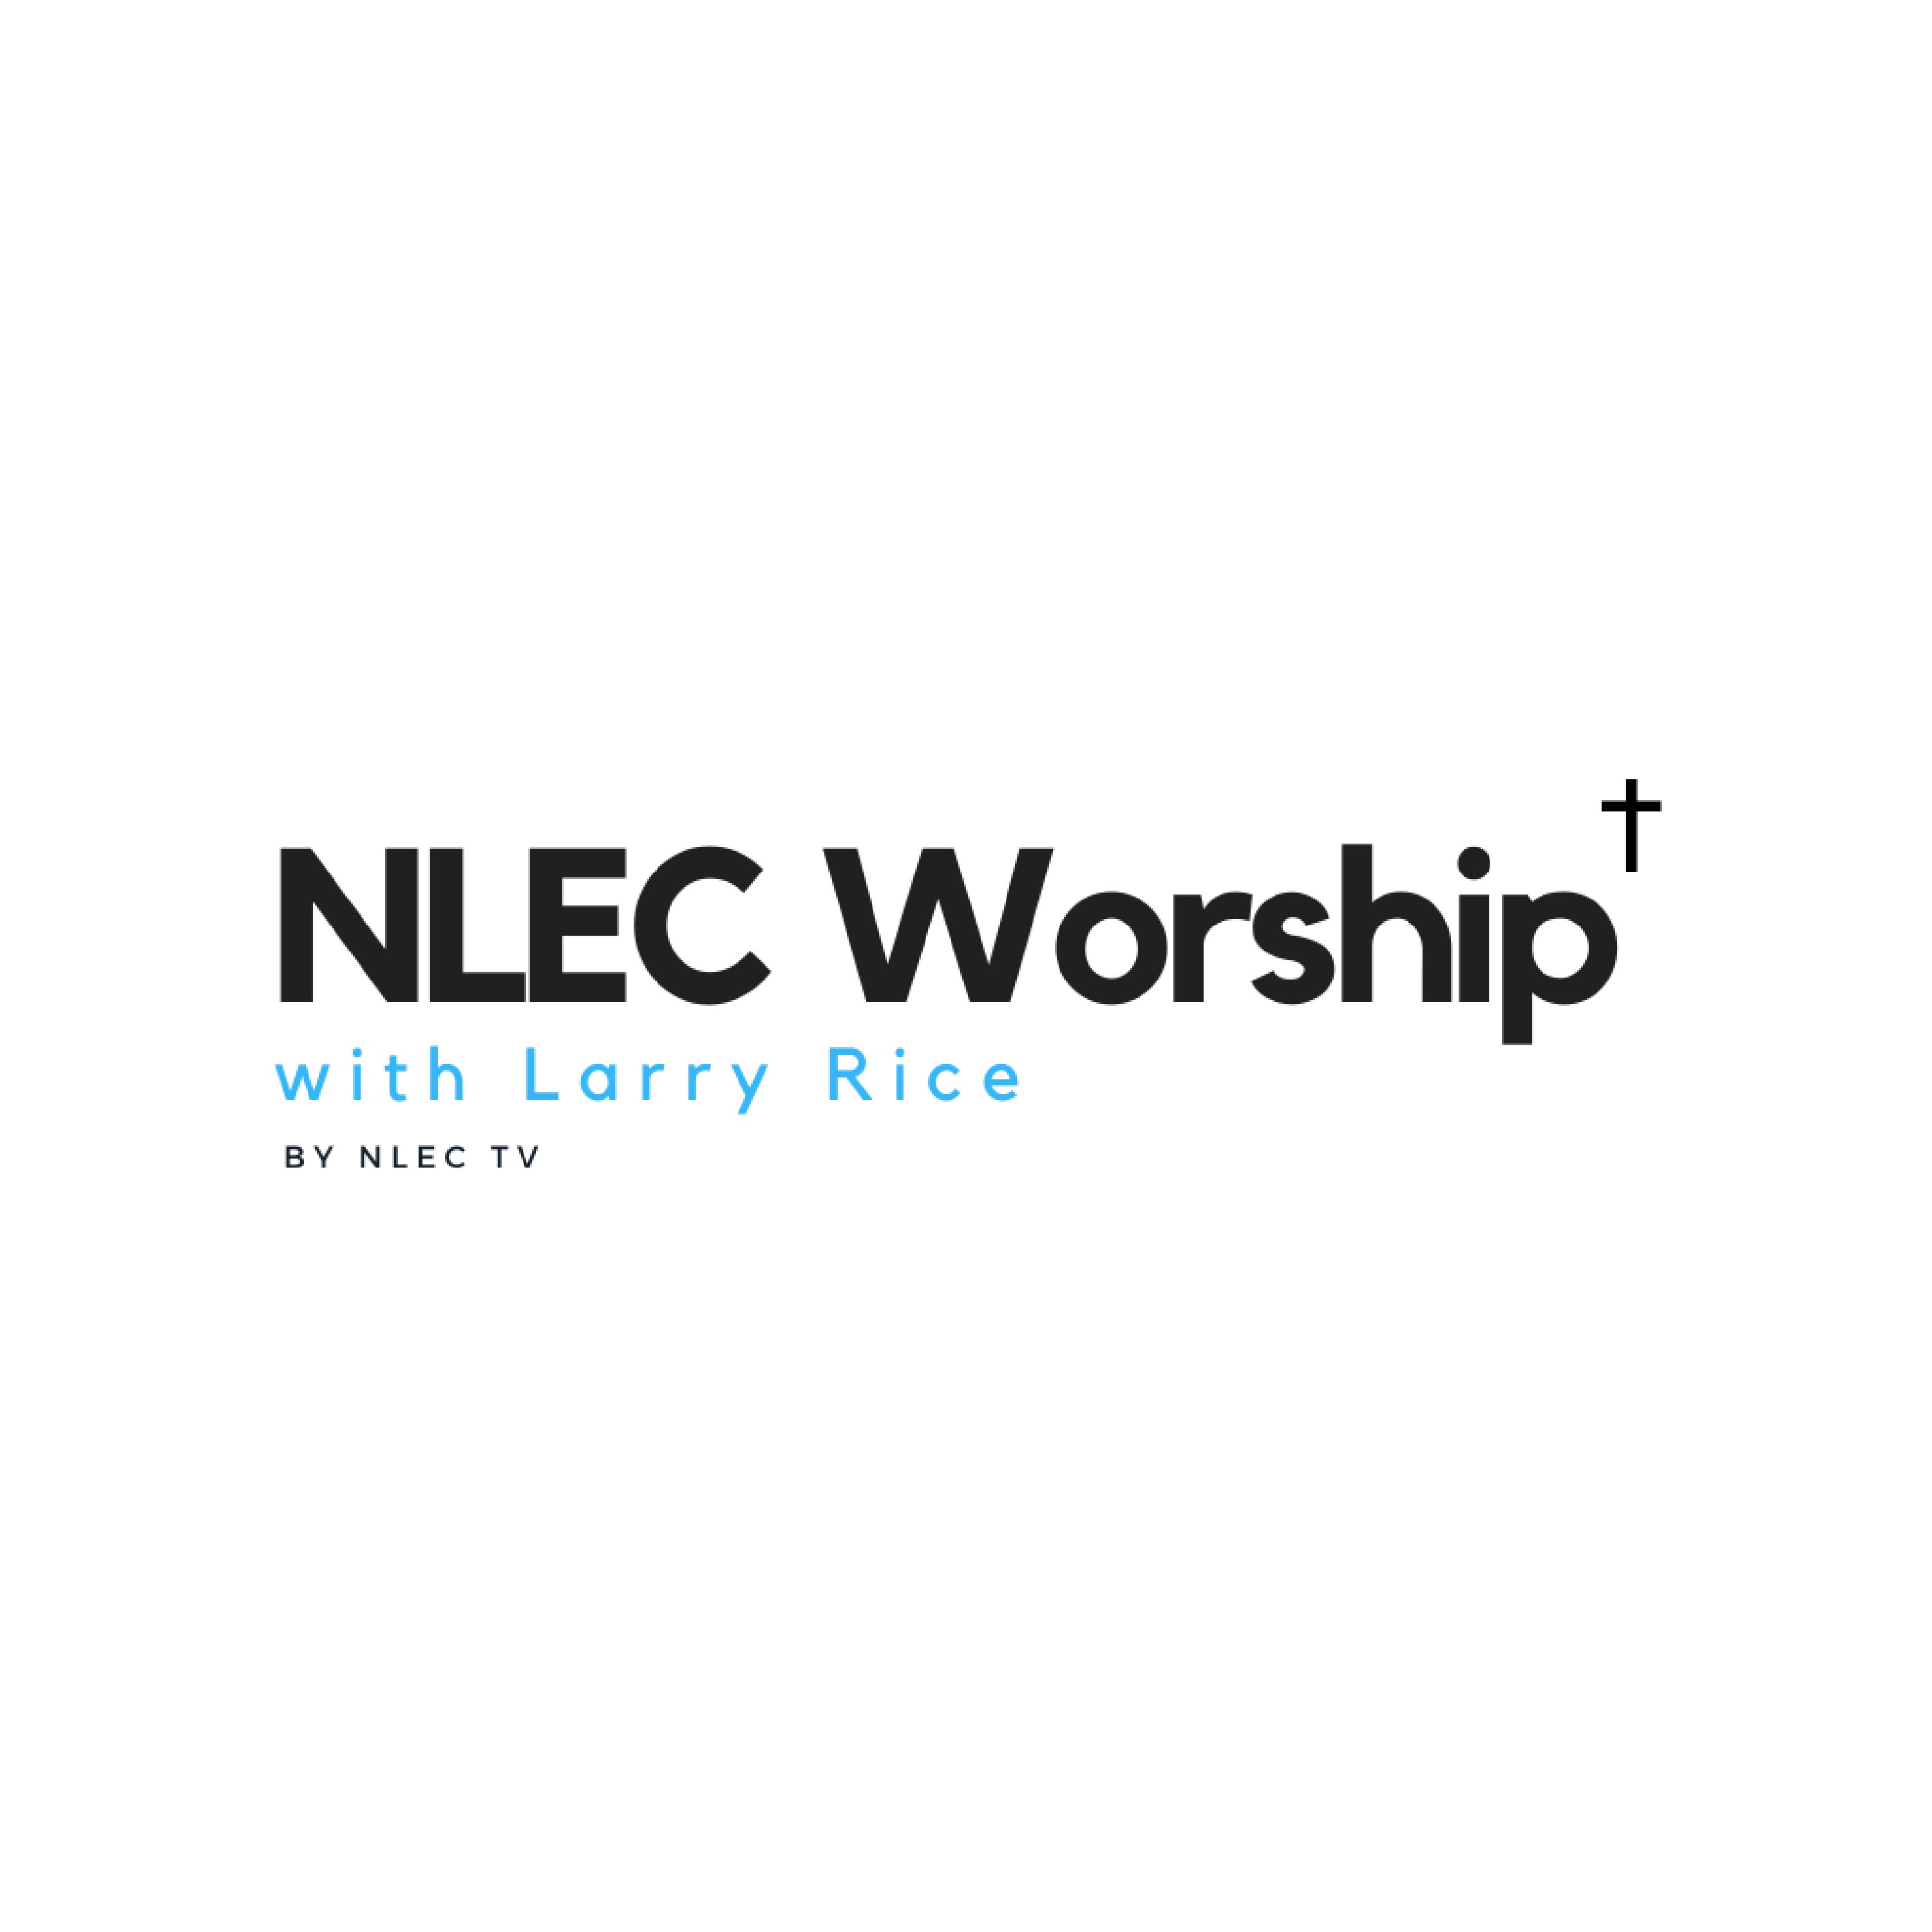 NLEC Worship with Larry Rice: The Series on NLEC TV